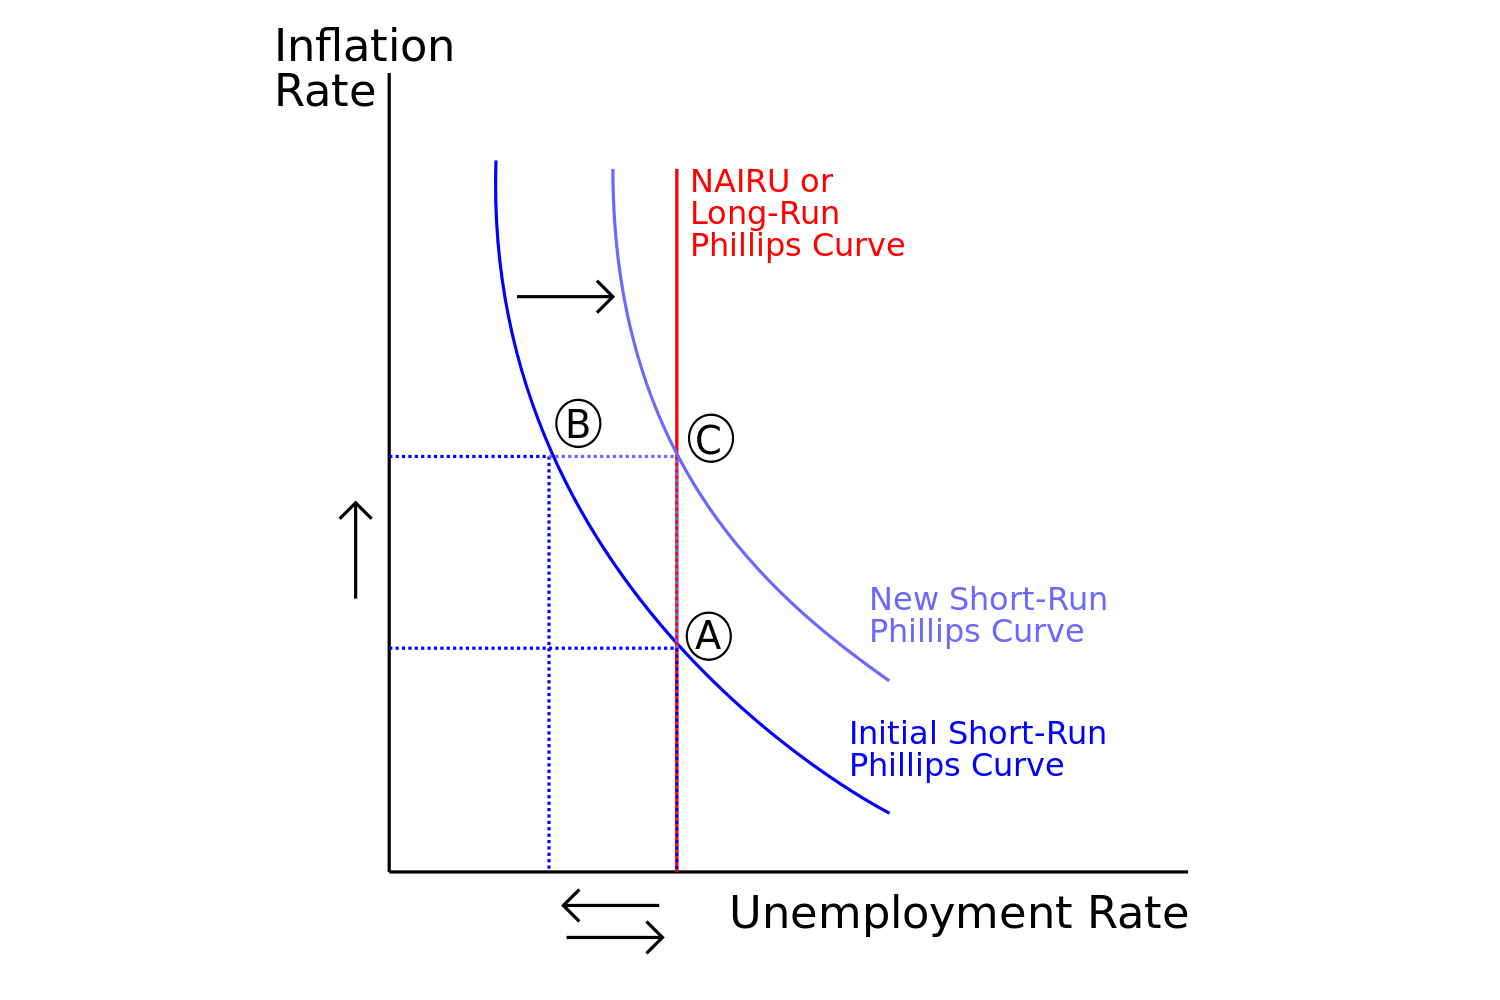 Tax Rebates Shift The Phillips Curve To The Left